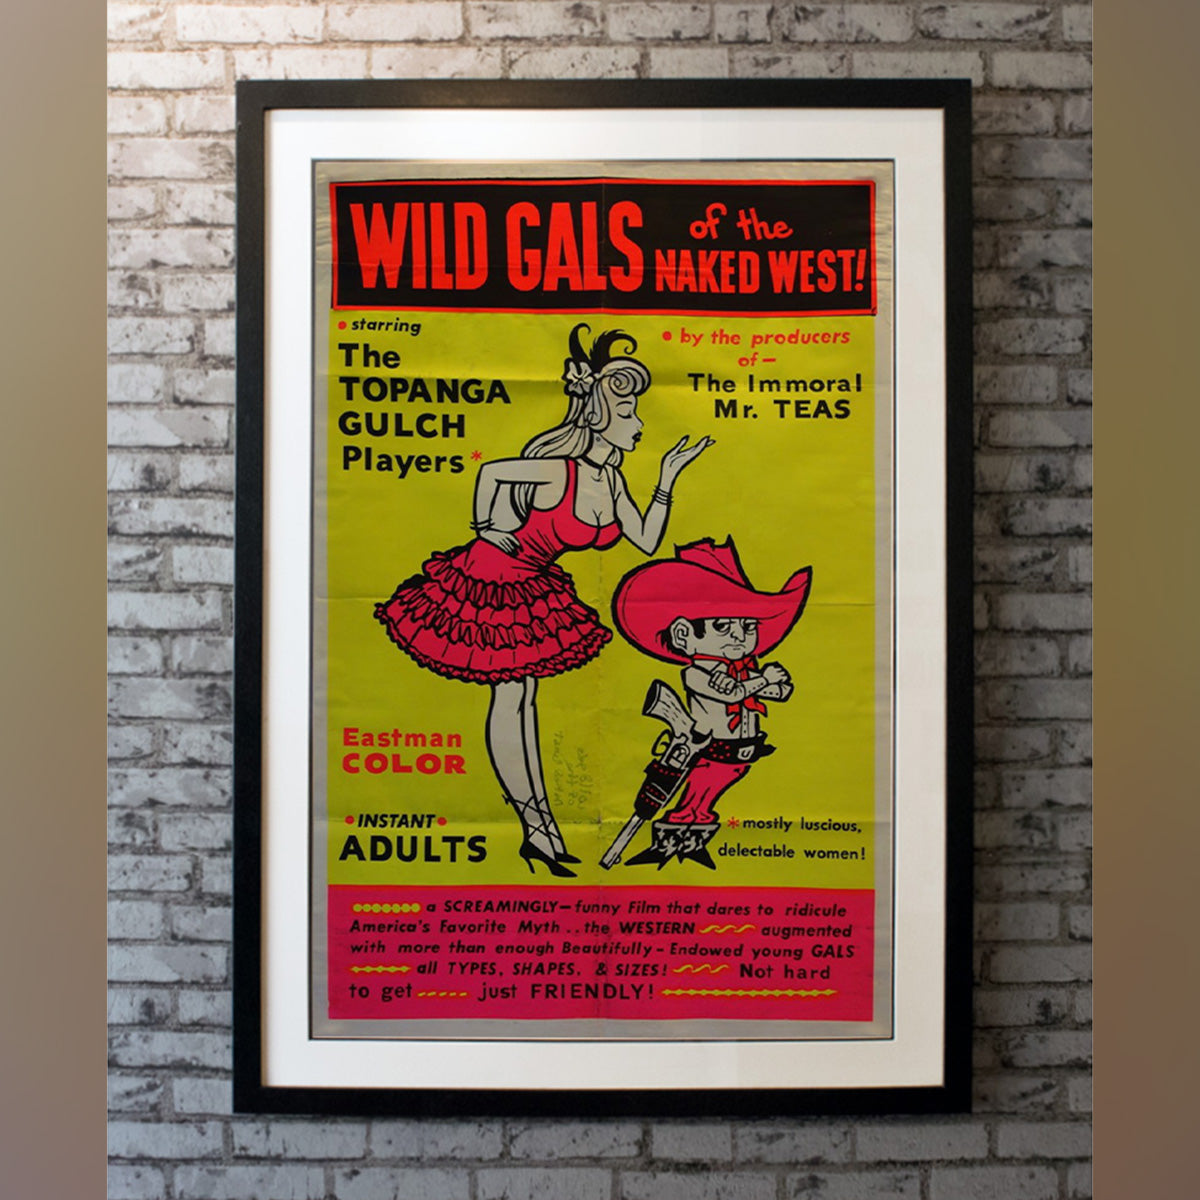 Original Movie Poster of Wild Gals Of The Naked West (1962)